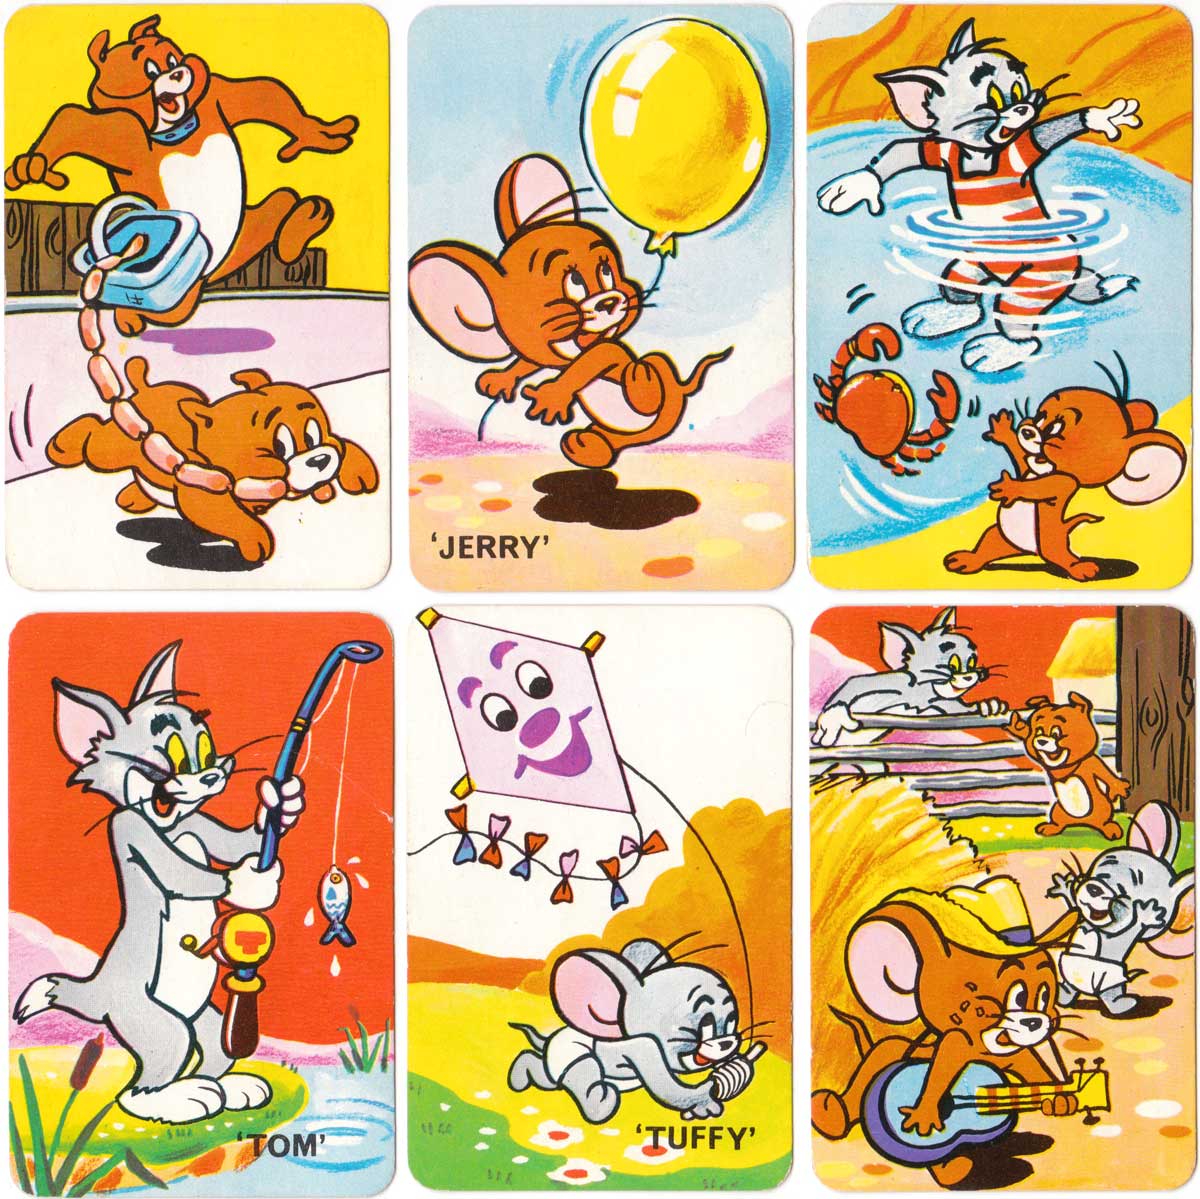 Tom and Jerry Snap published by Pepys Games, 1972